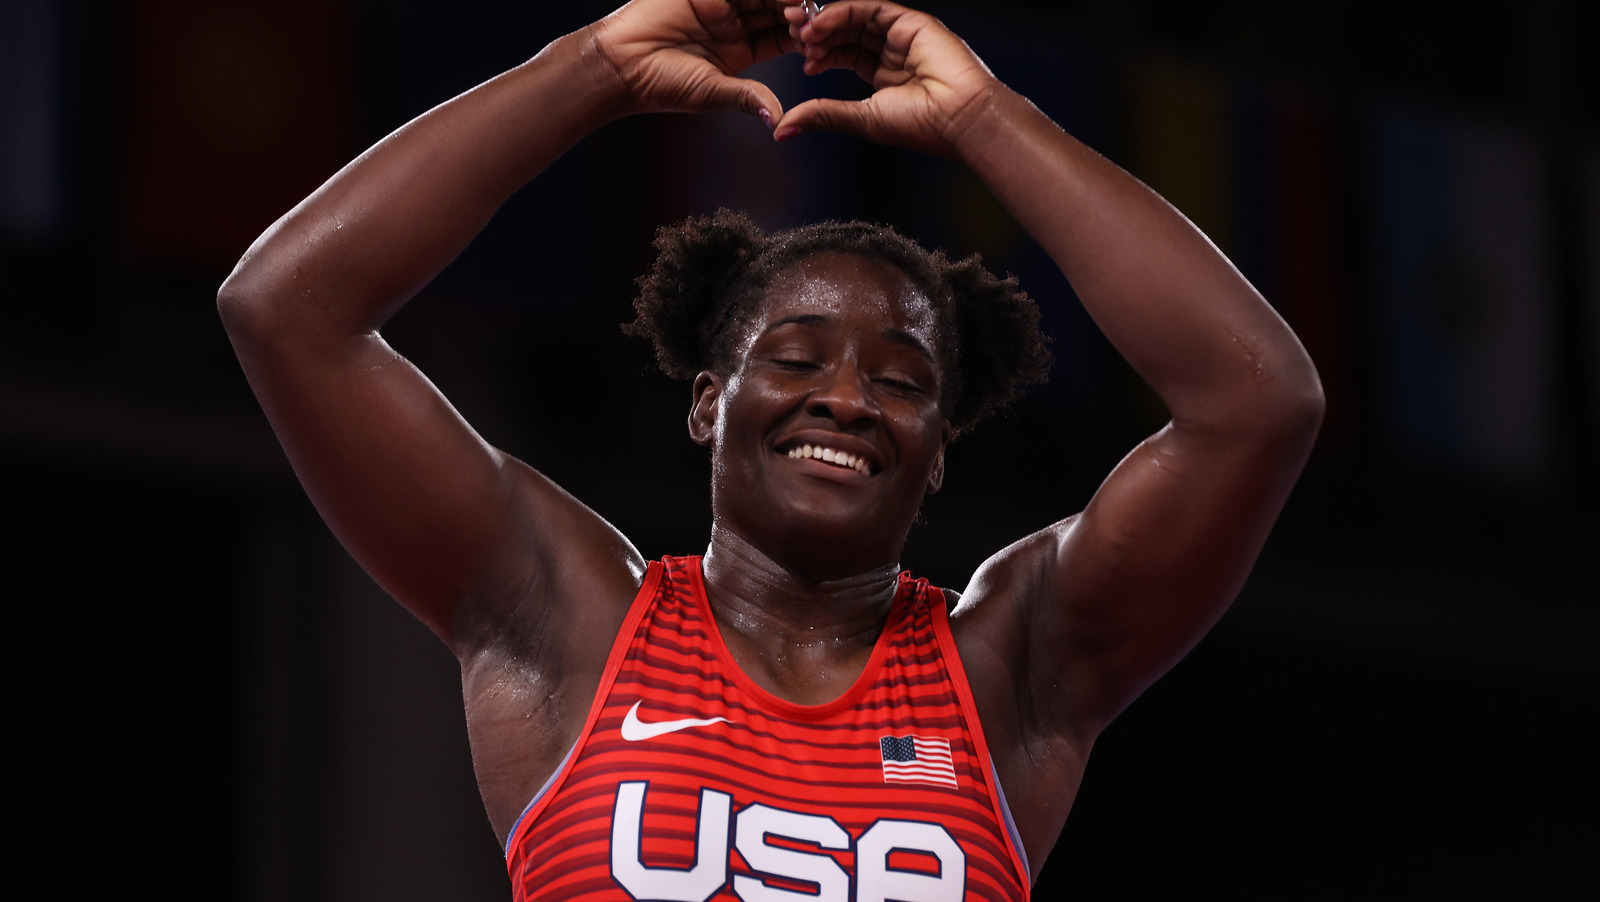 Olympic Gold Medalist Tamyra Mensah-Stock Is Reportedly Progressing Well In WWE